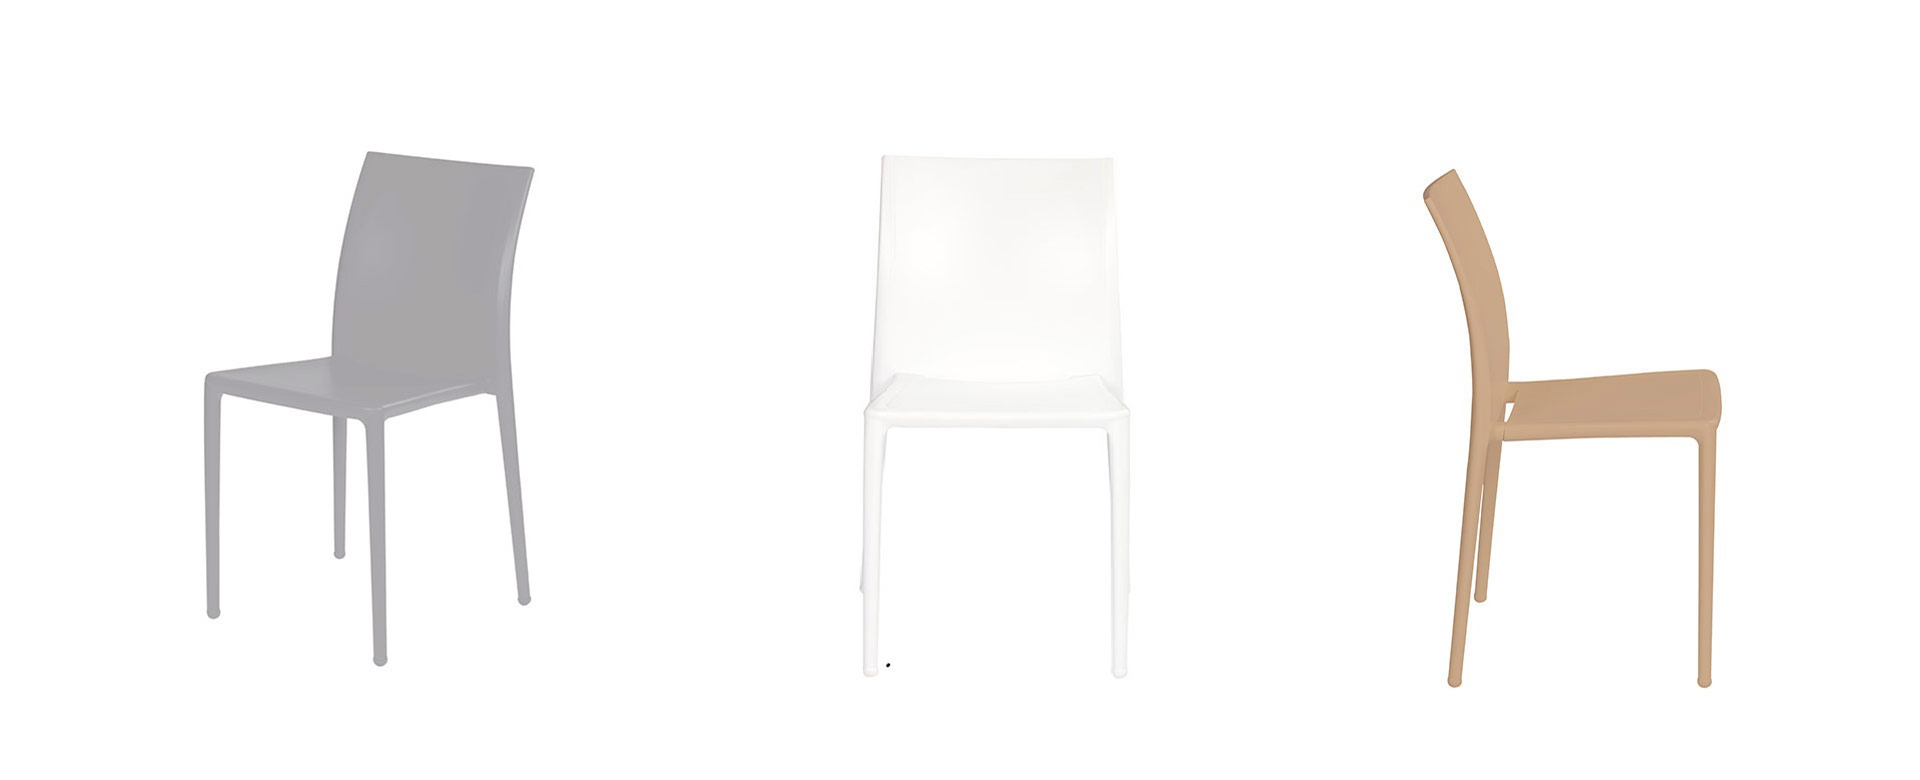 LUCIDO Outdoor Chairs